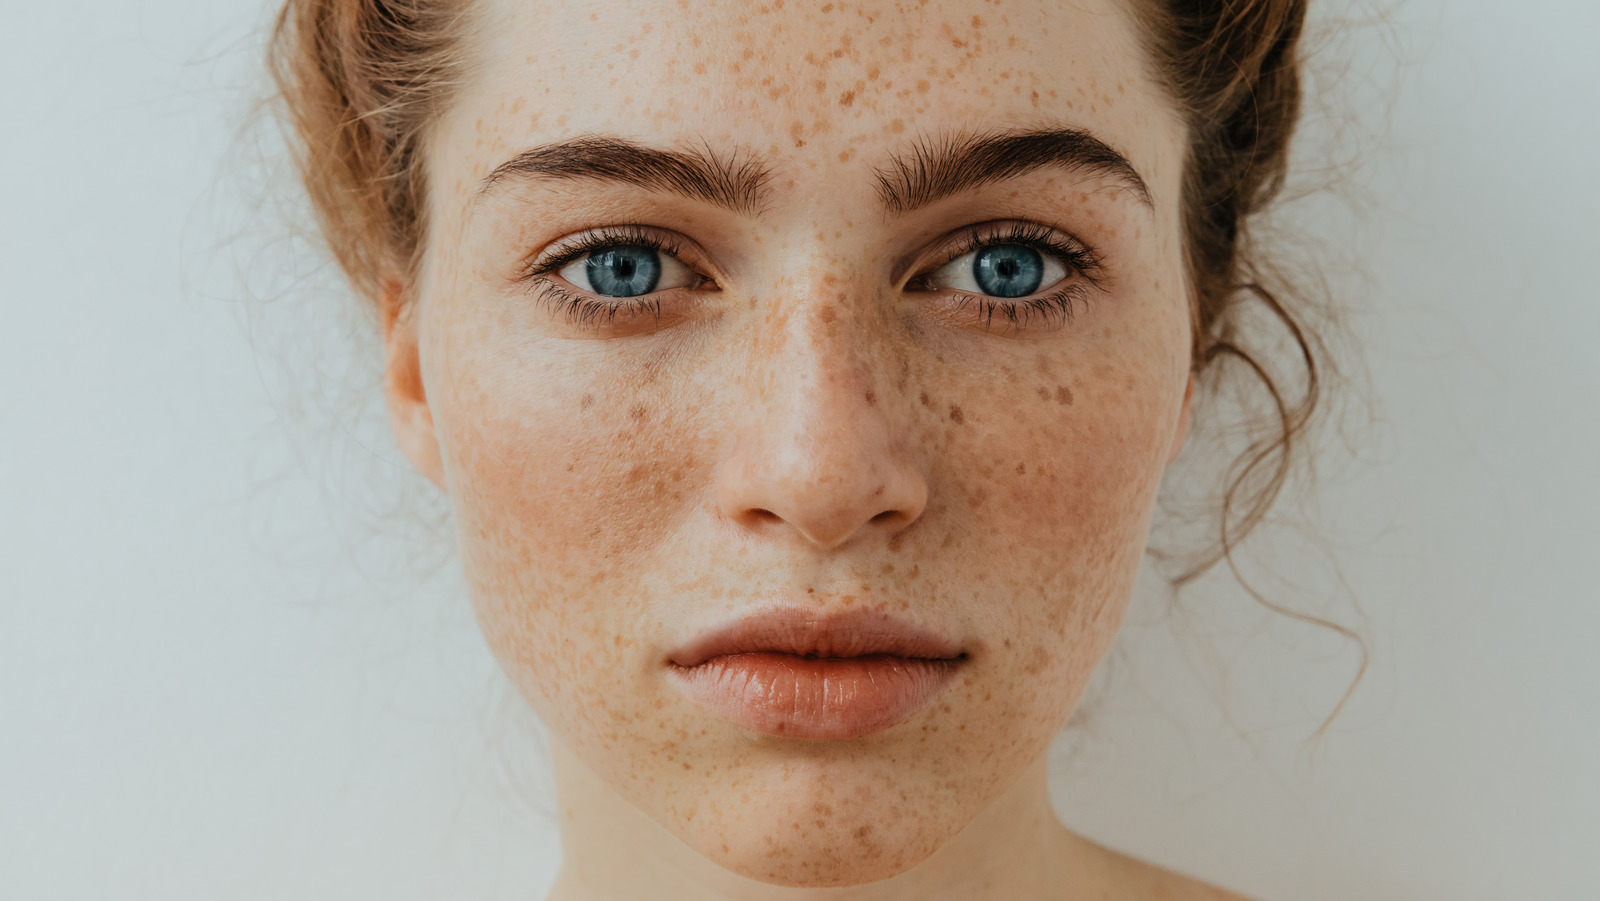 Freckles acnh - 🧡 I Saw the Sun-And the Freckles, too - Avail Dermatology.